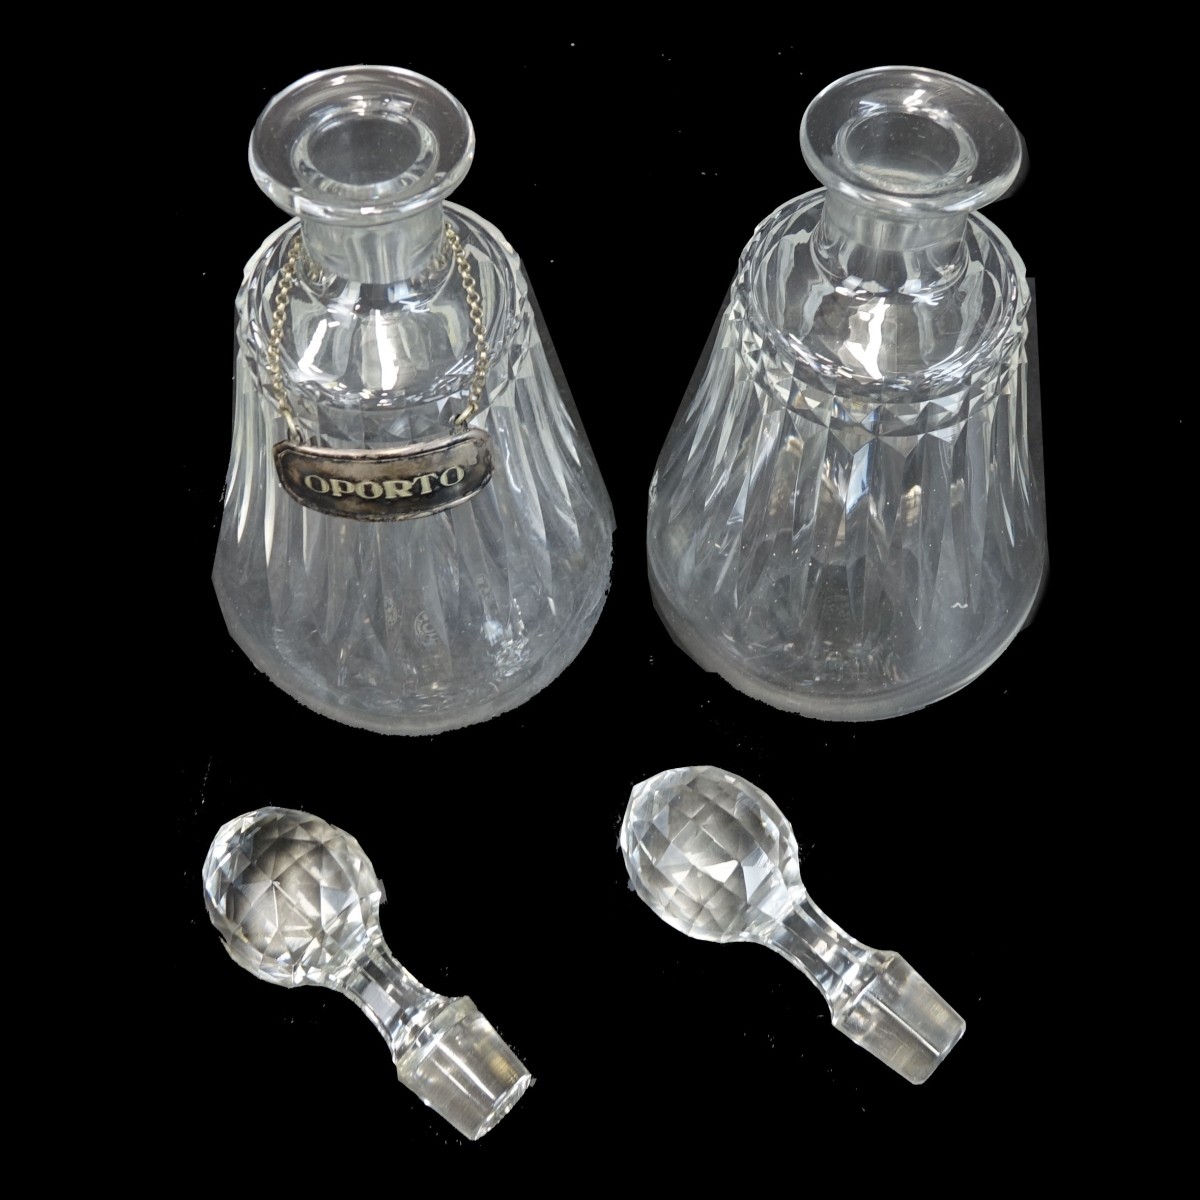 Pair of Baccarat Decanters